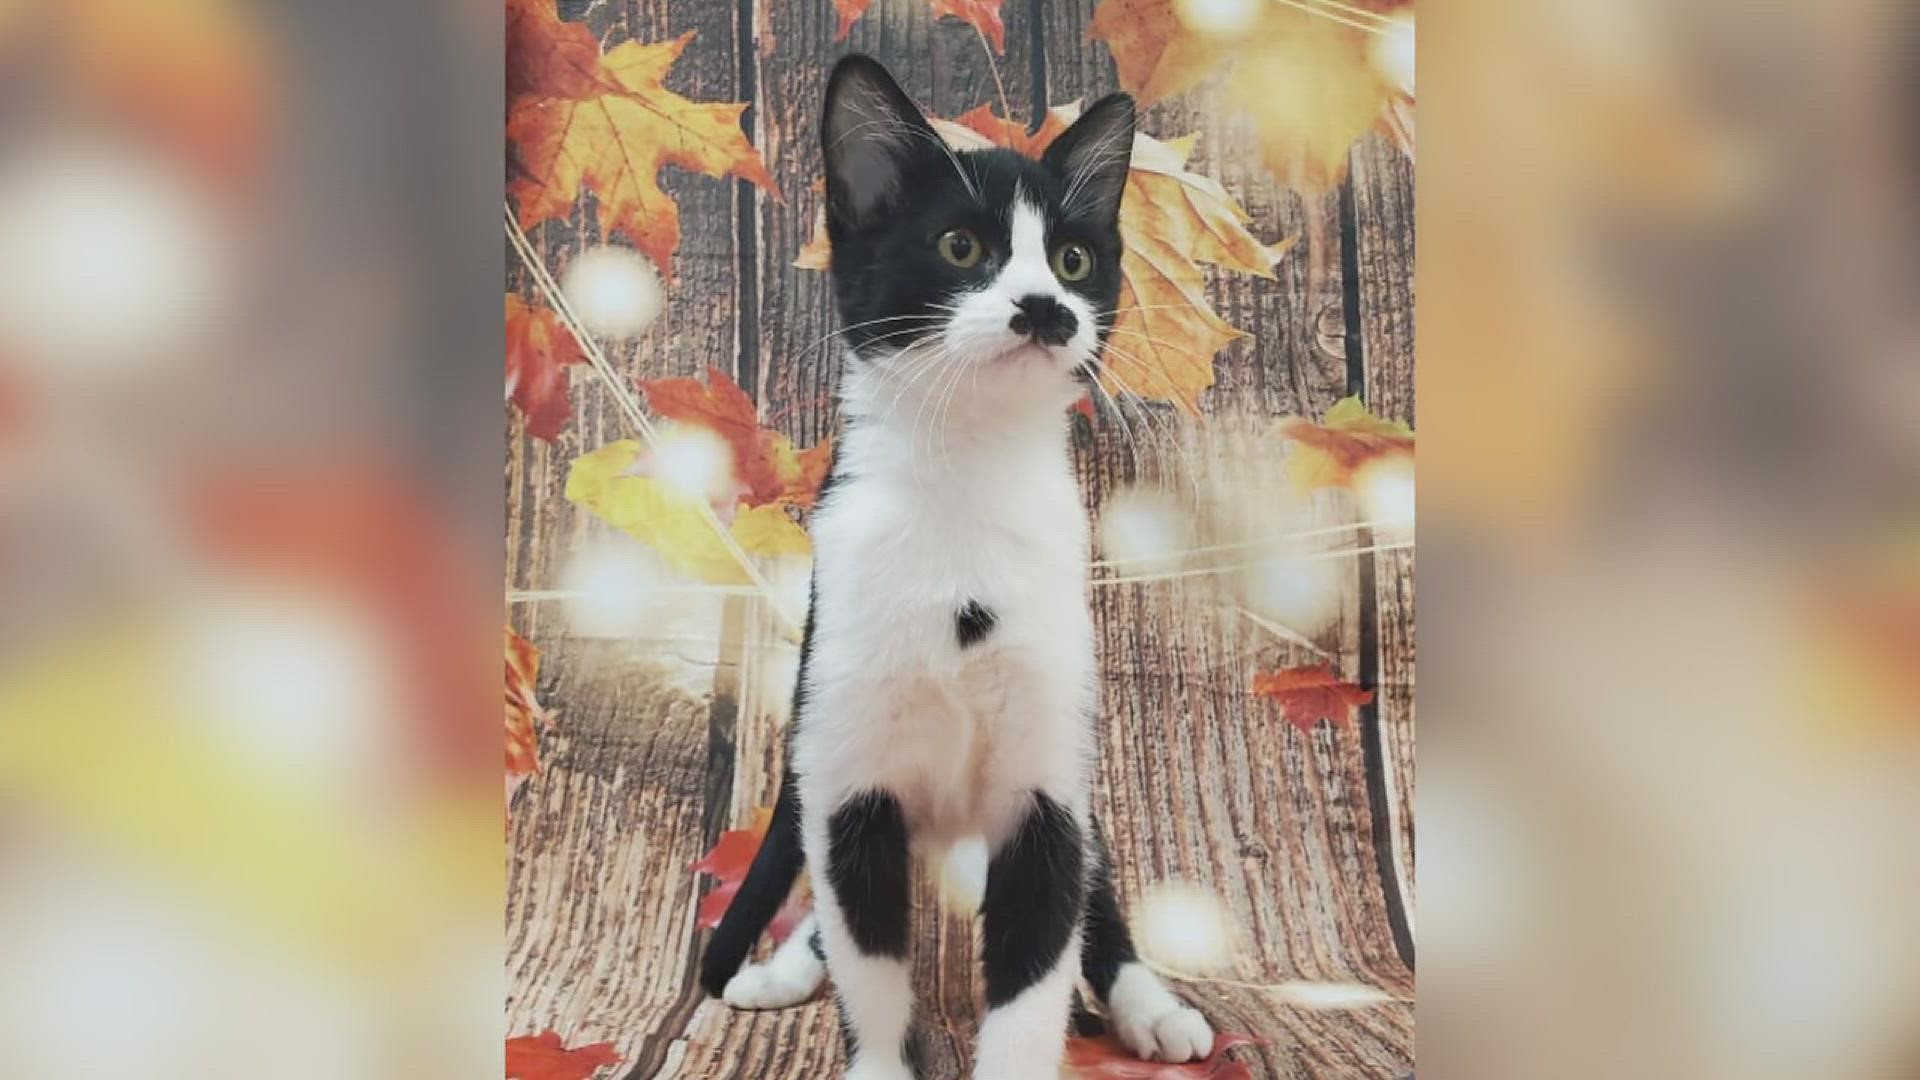 The Quad City Animal Welfare Center's Pet of the Week for November 16, 2021 is Hope the Kitten!